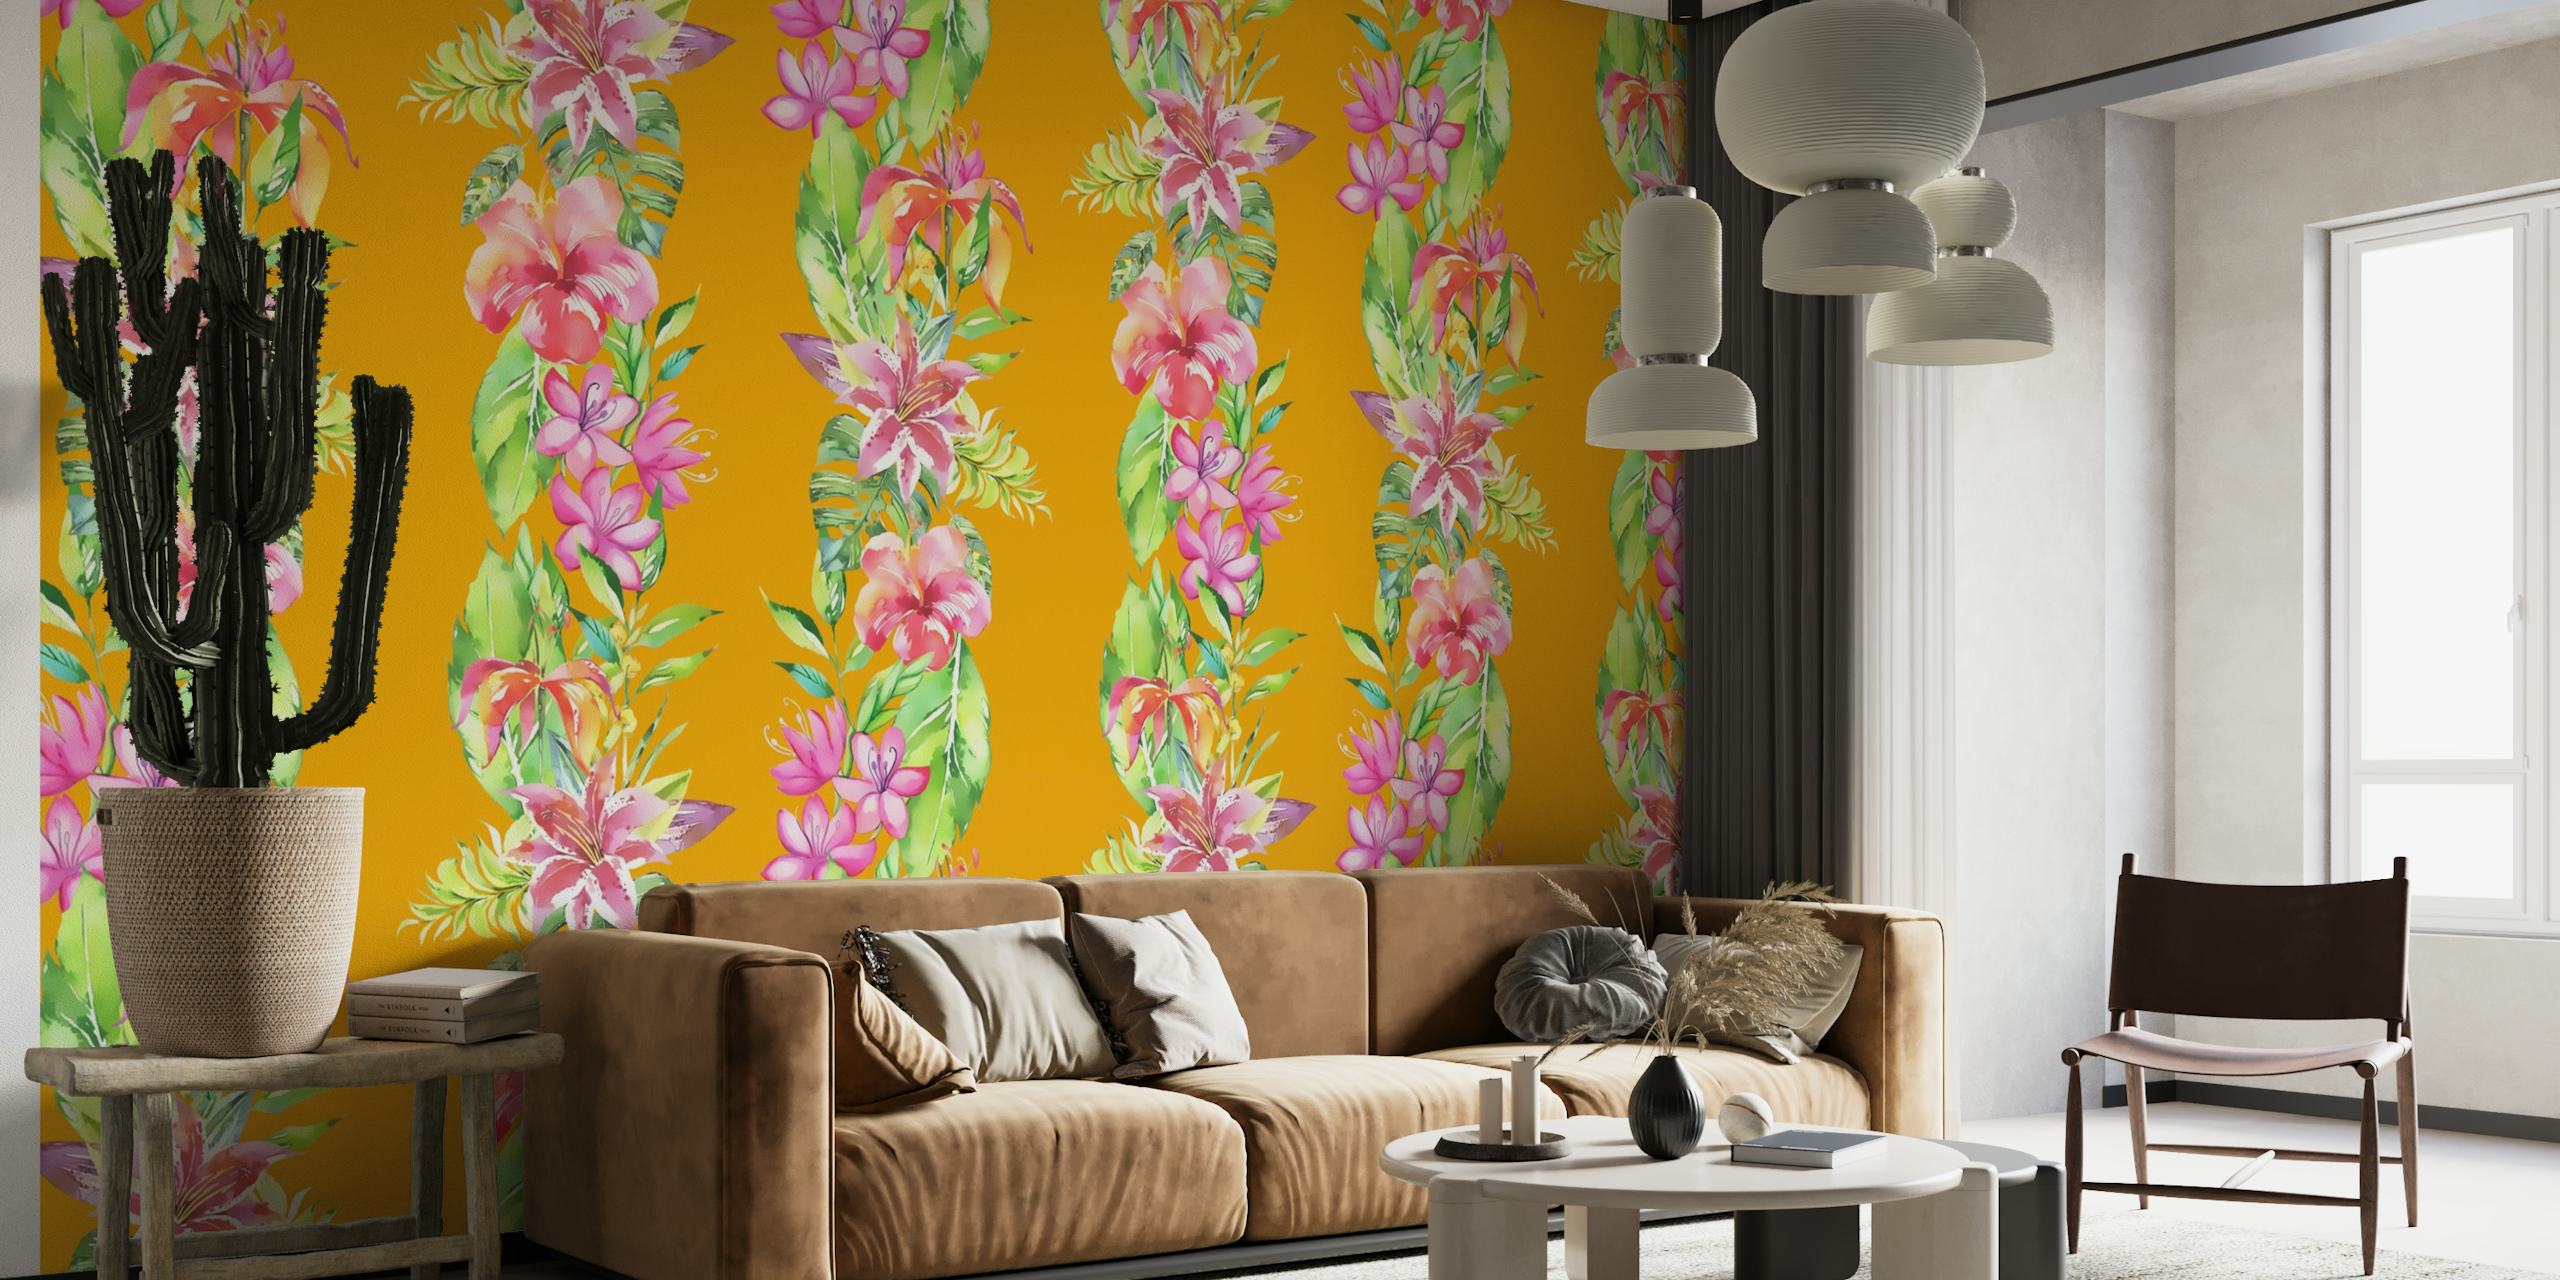 Colorful tropical floral patterns on yellow striped background wall mural